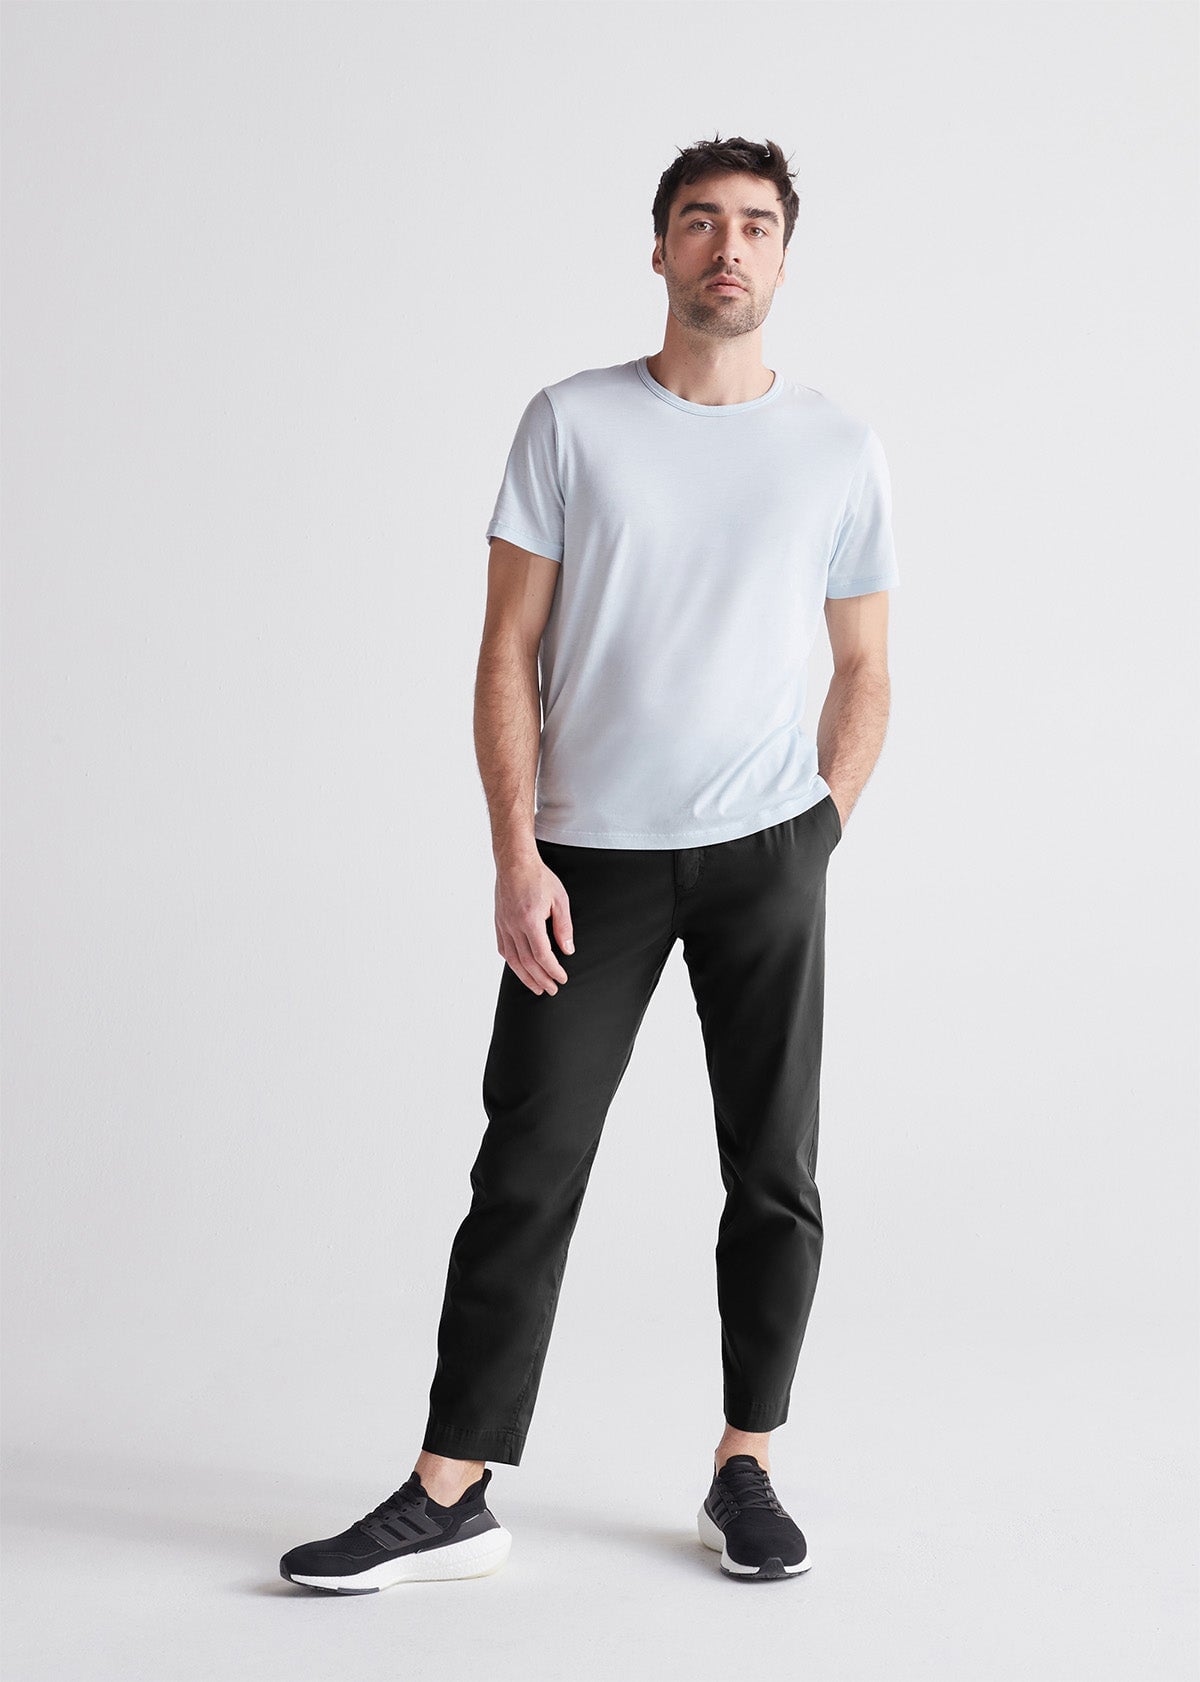 The Ultimate Travel Pant For Men